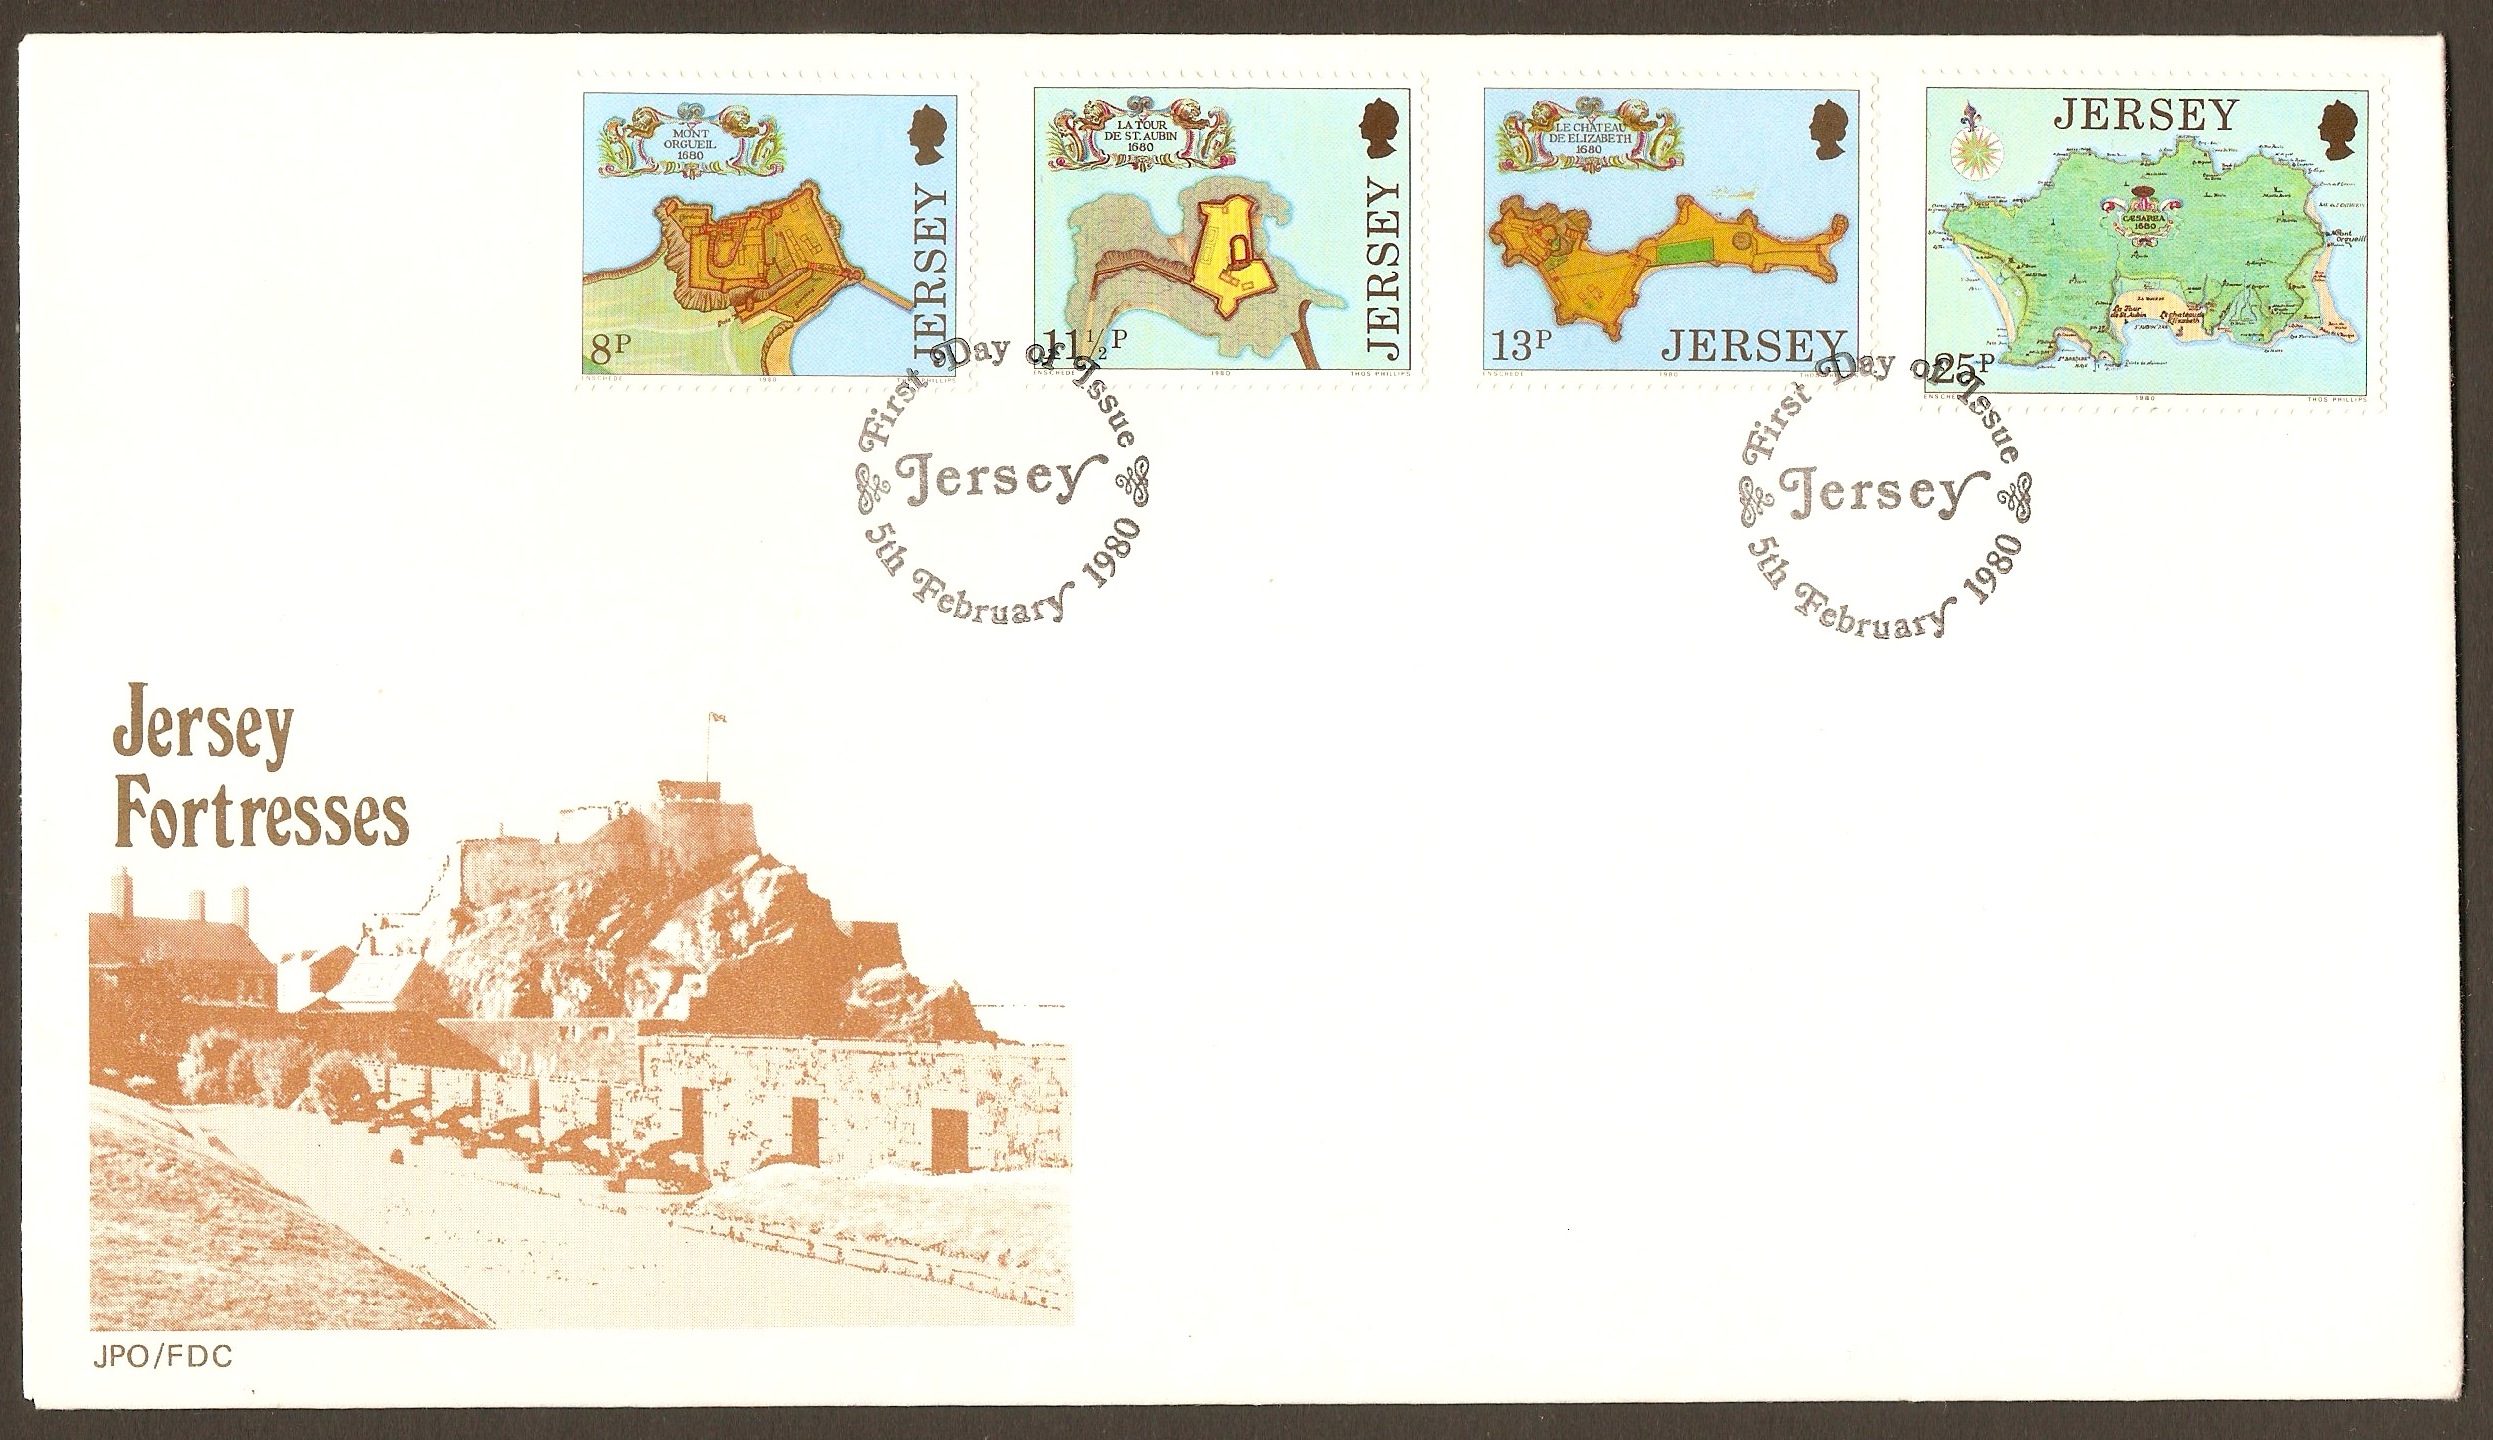 Jersey 1980 Fortresses set FDC.